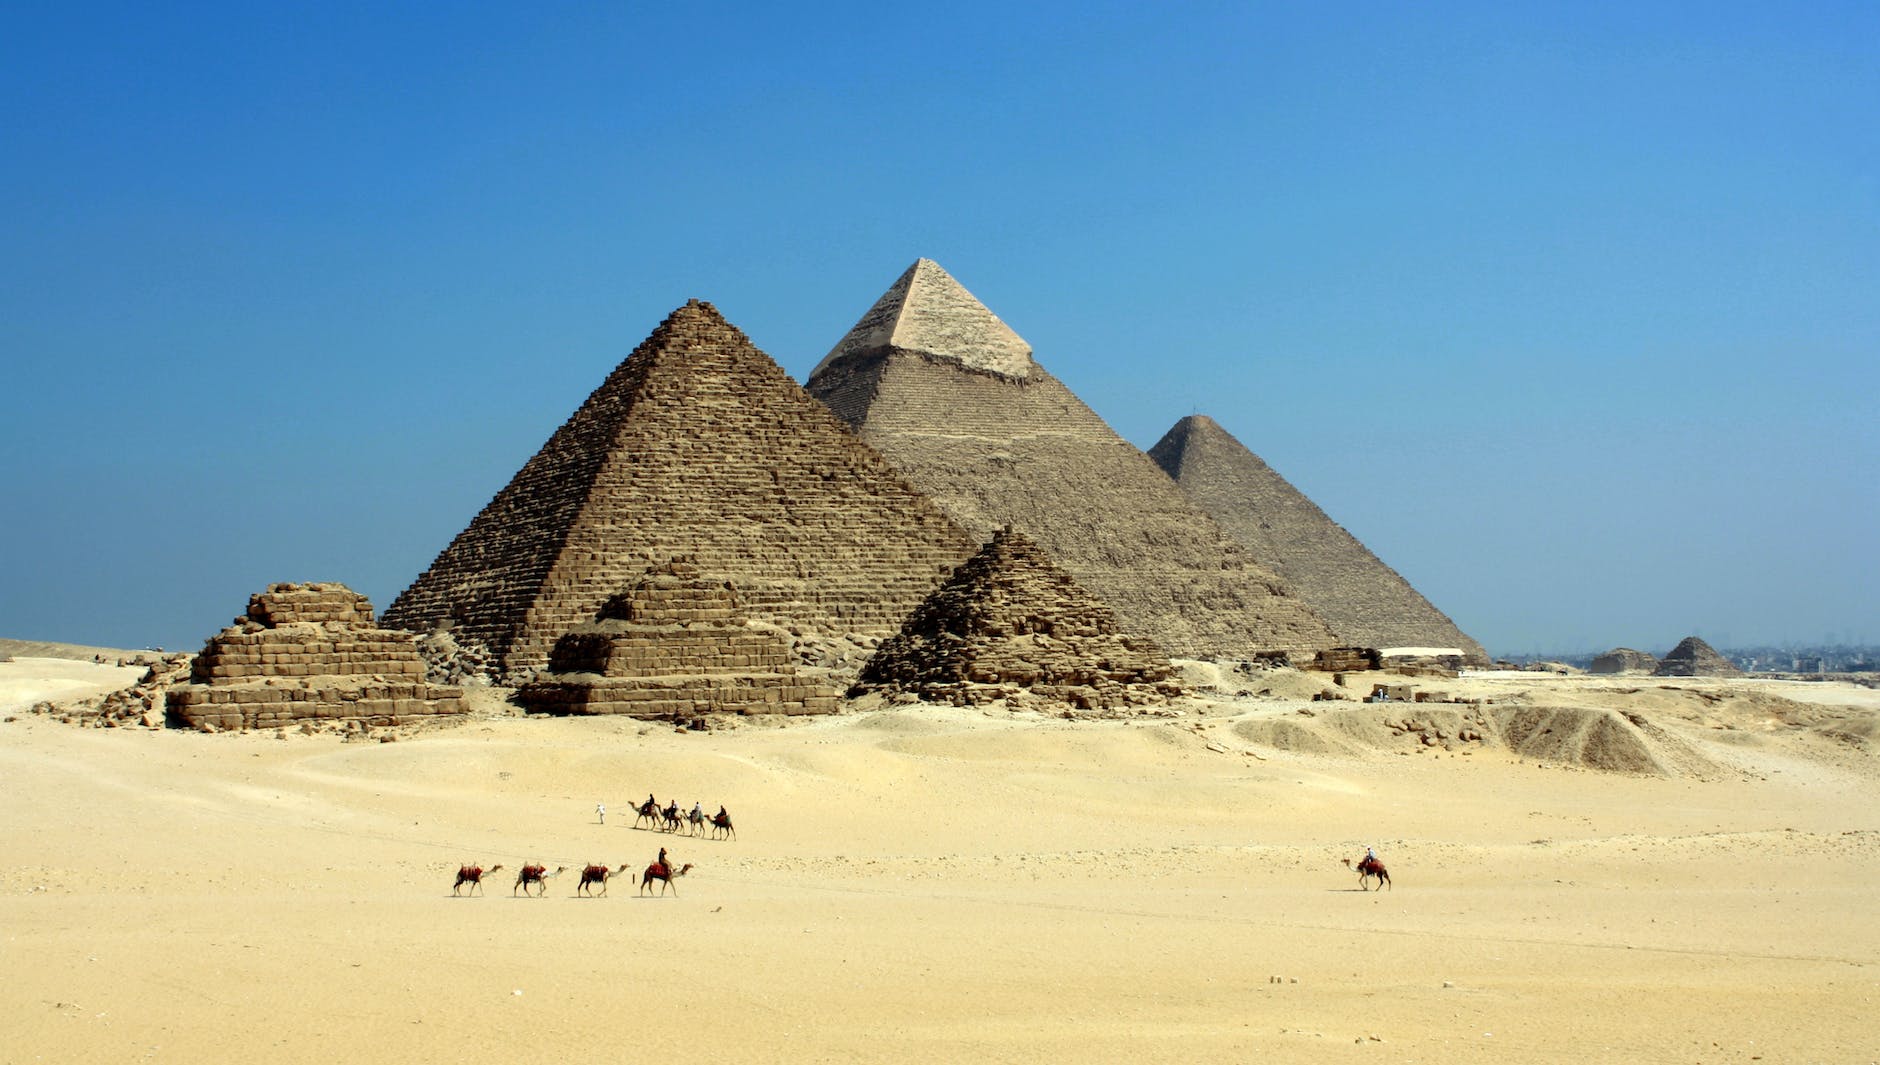 Great Egyptian pyramids, which were around in the time of Joseph.